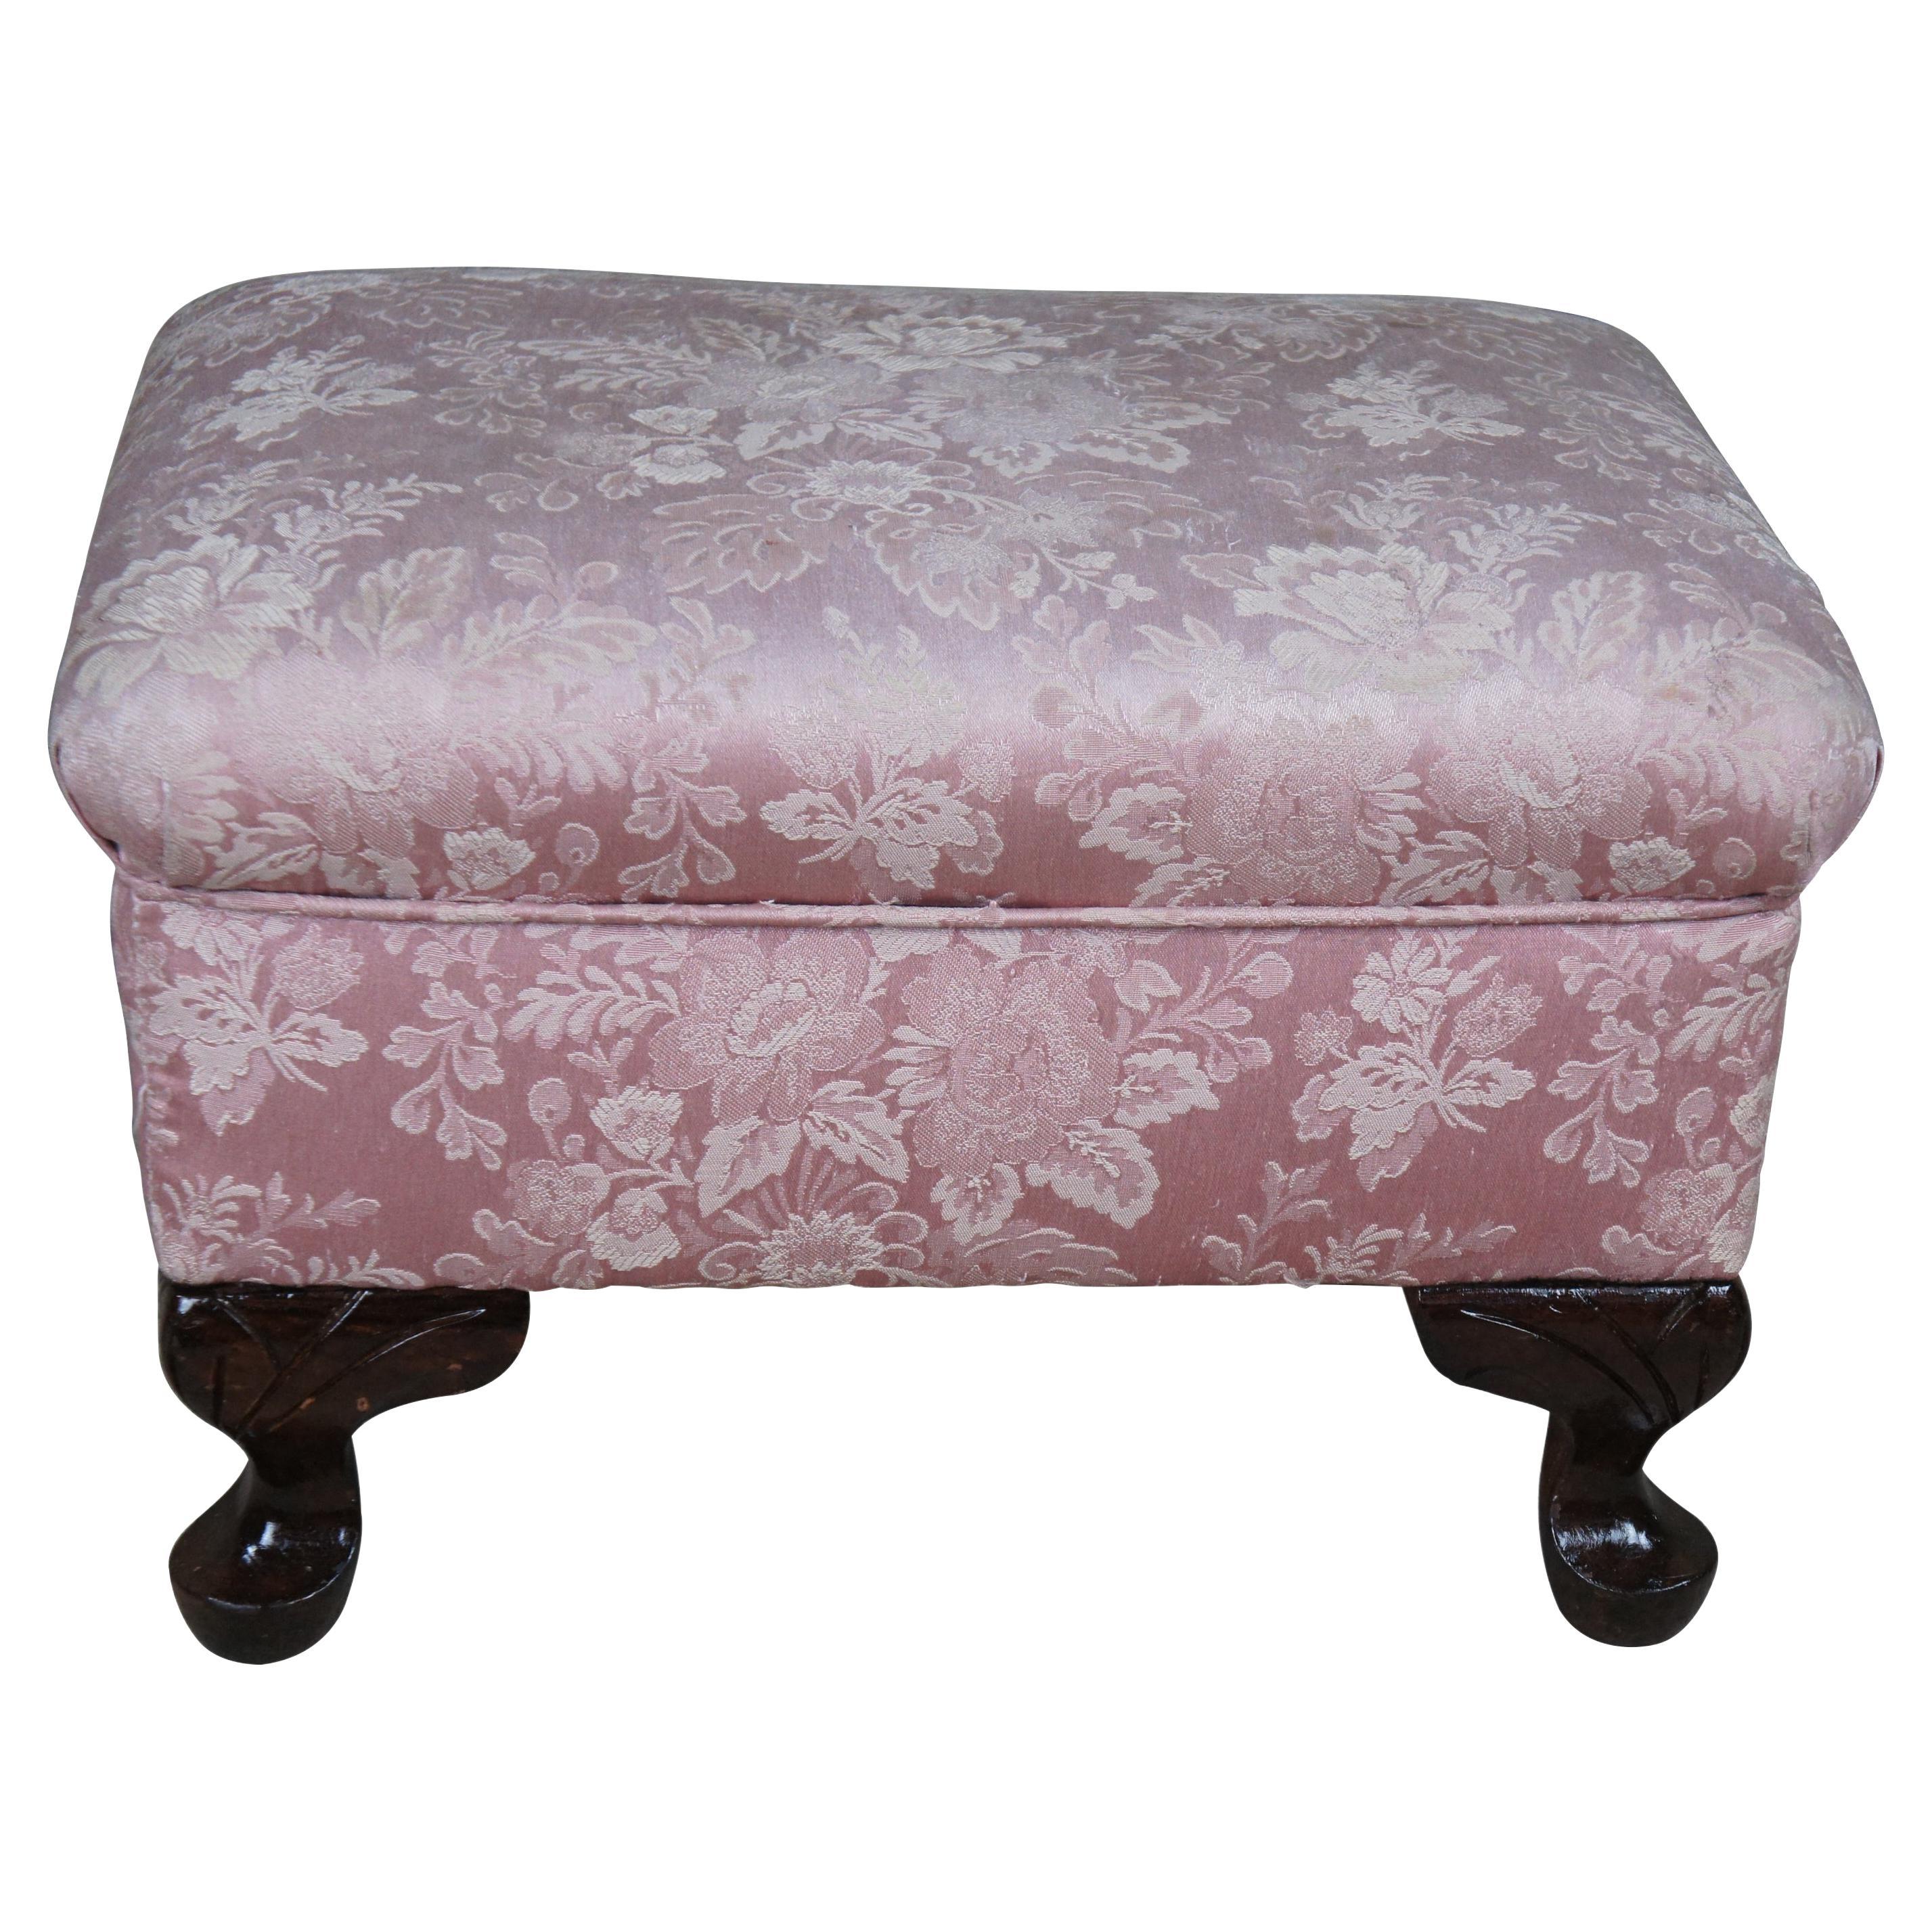 Vintage Queen Anne Floral Upholstered Walnut Ottoman Foot Stool Vanity Pouf Pink For Sale